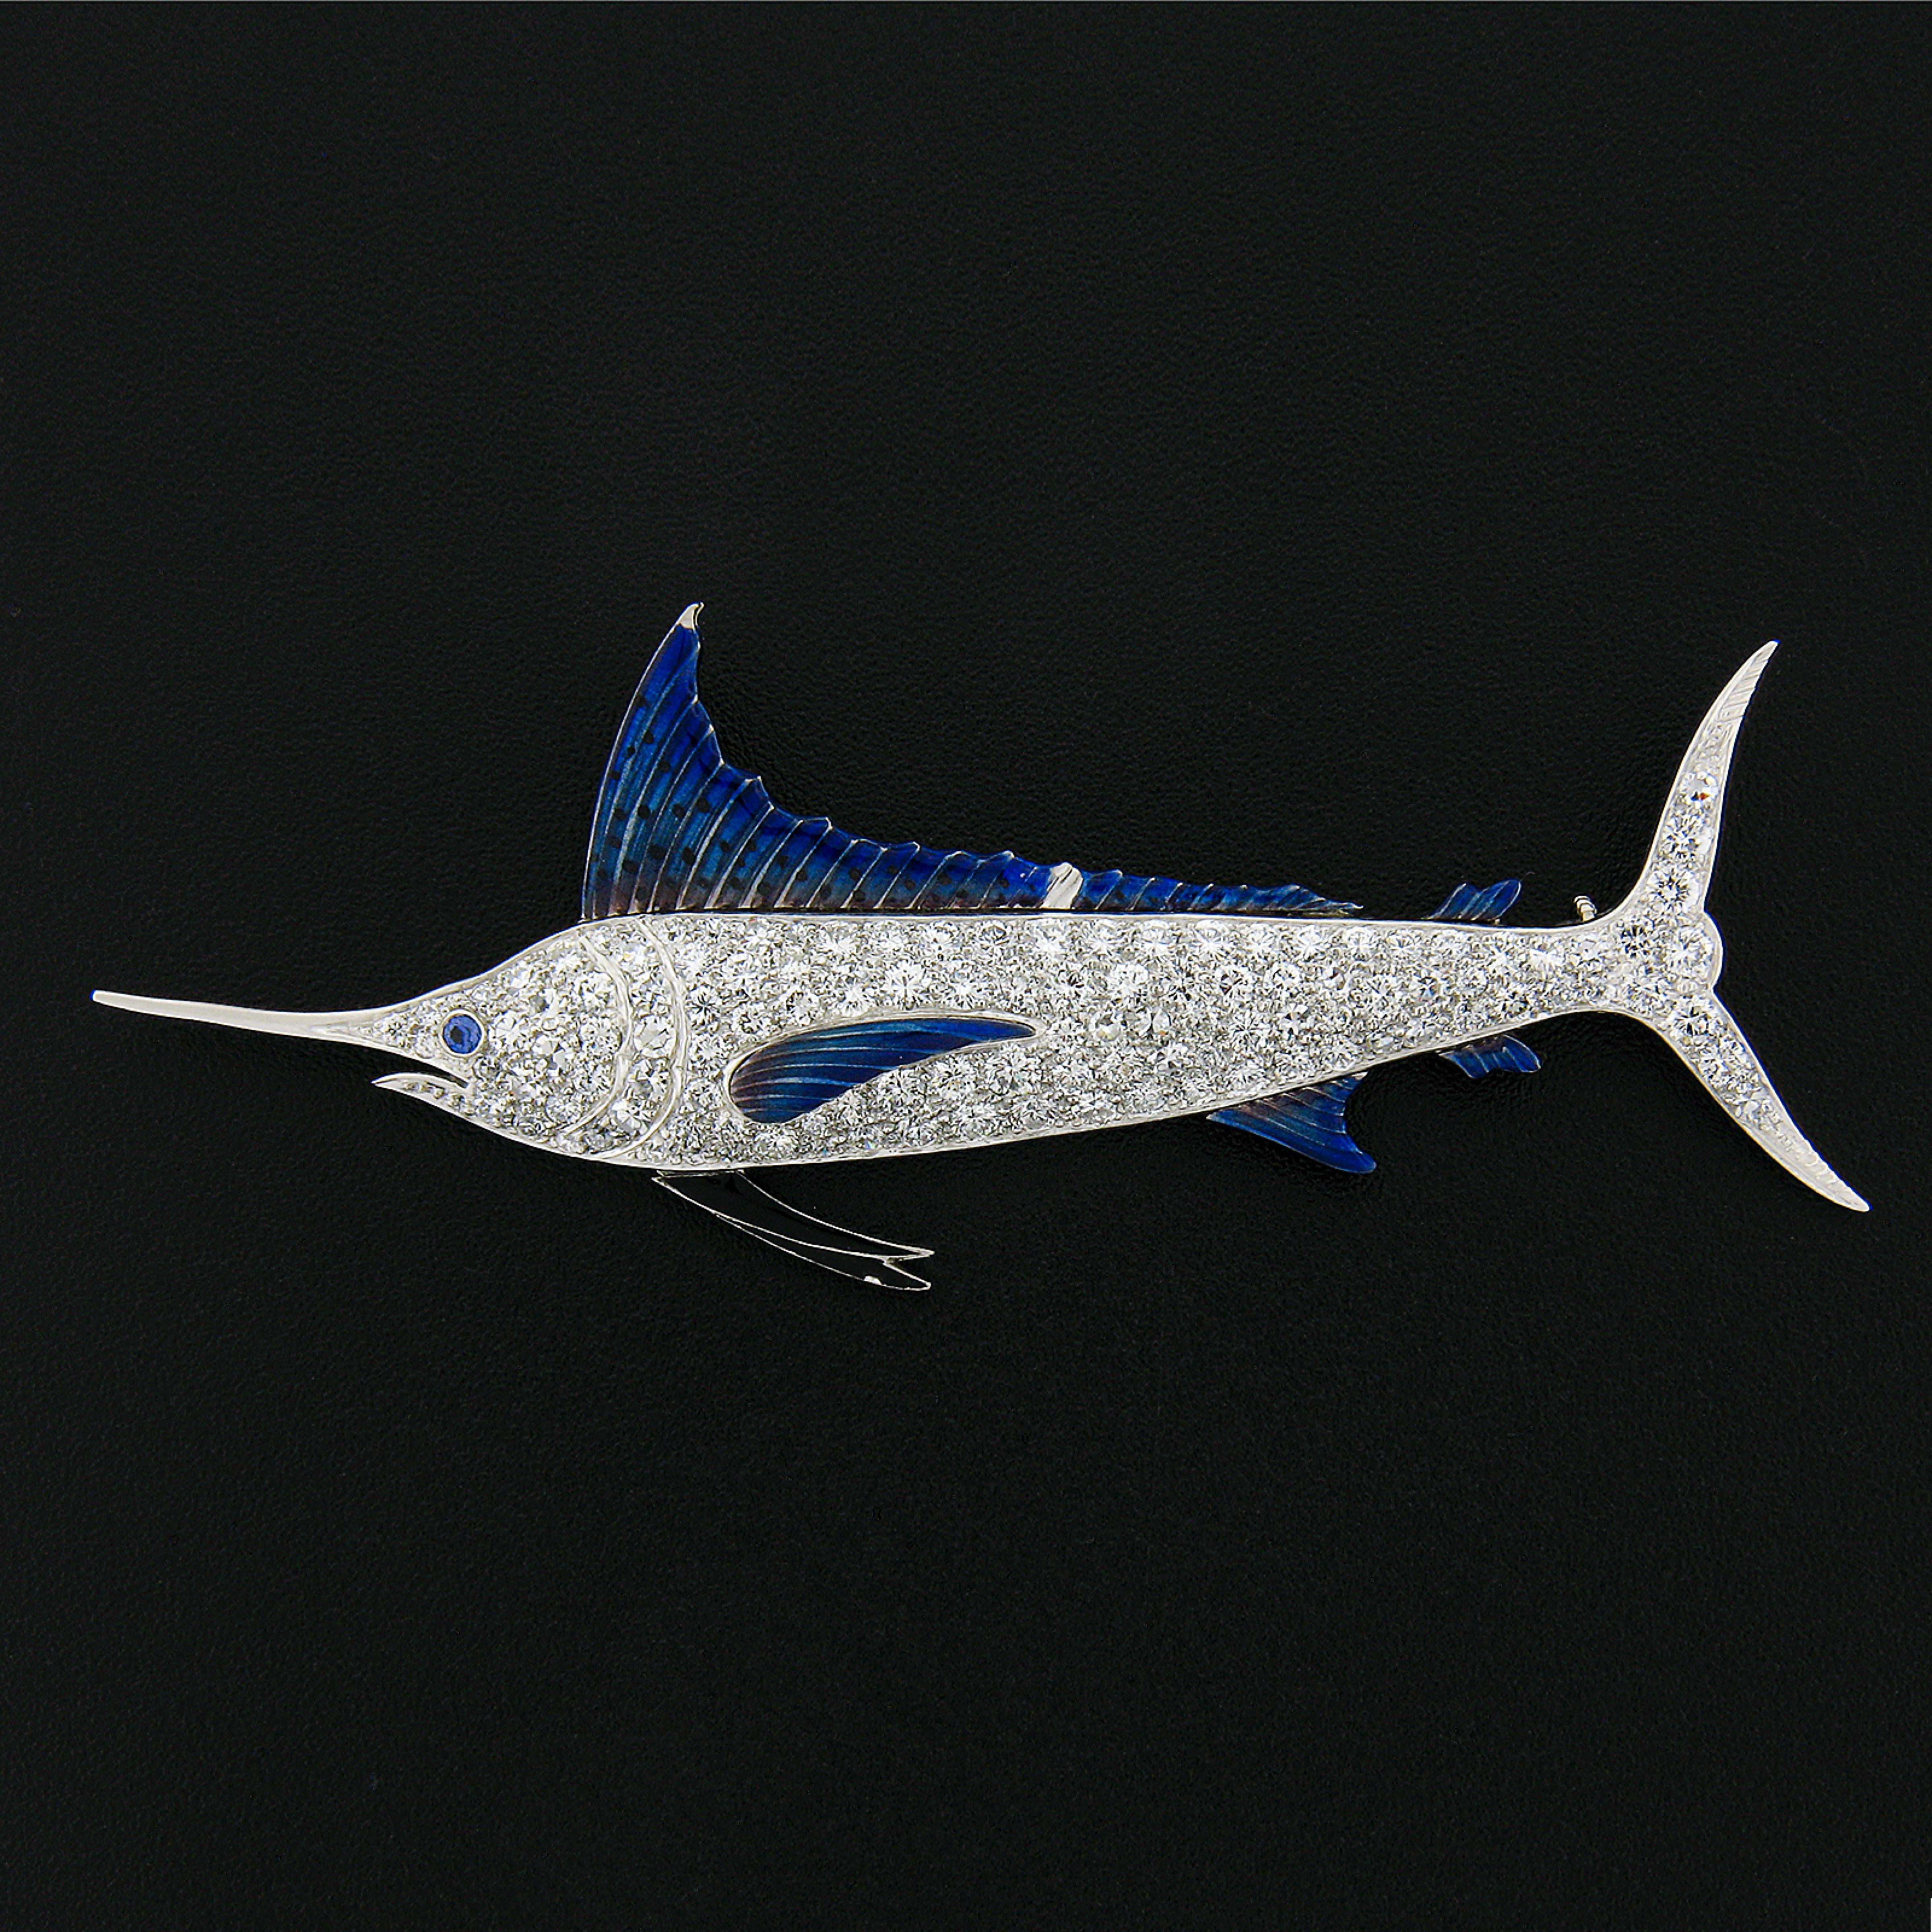 Here we have an absolutely stunning, all original, vintage brooch that was very well crafted from solid platinum. This magnificent and exceptionally well made piece features a nicely detailed swordfish design and is drenched with TOP quality